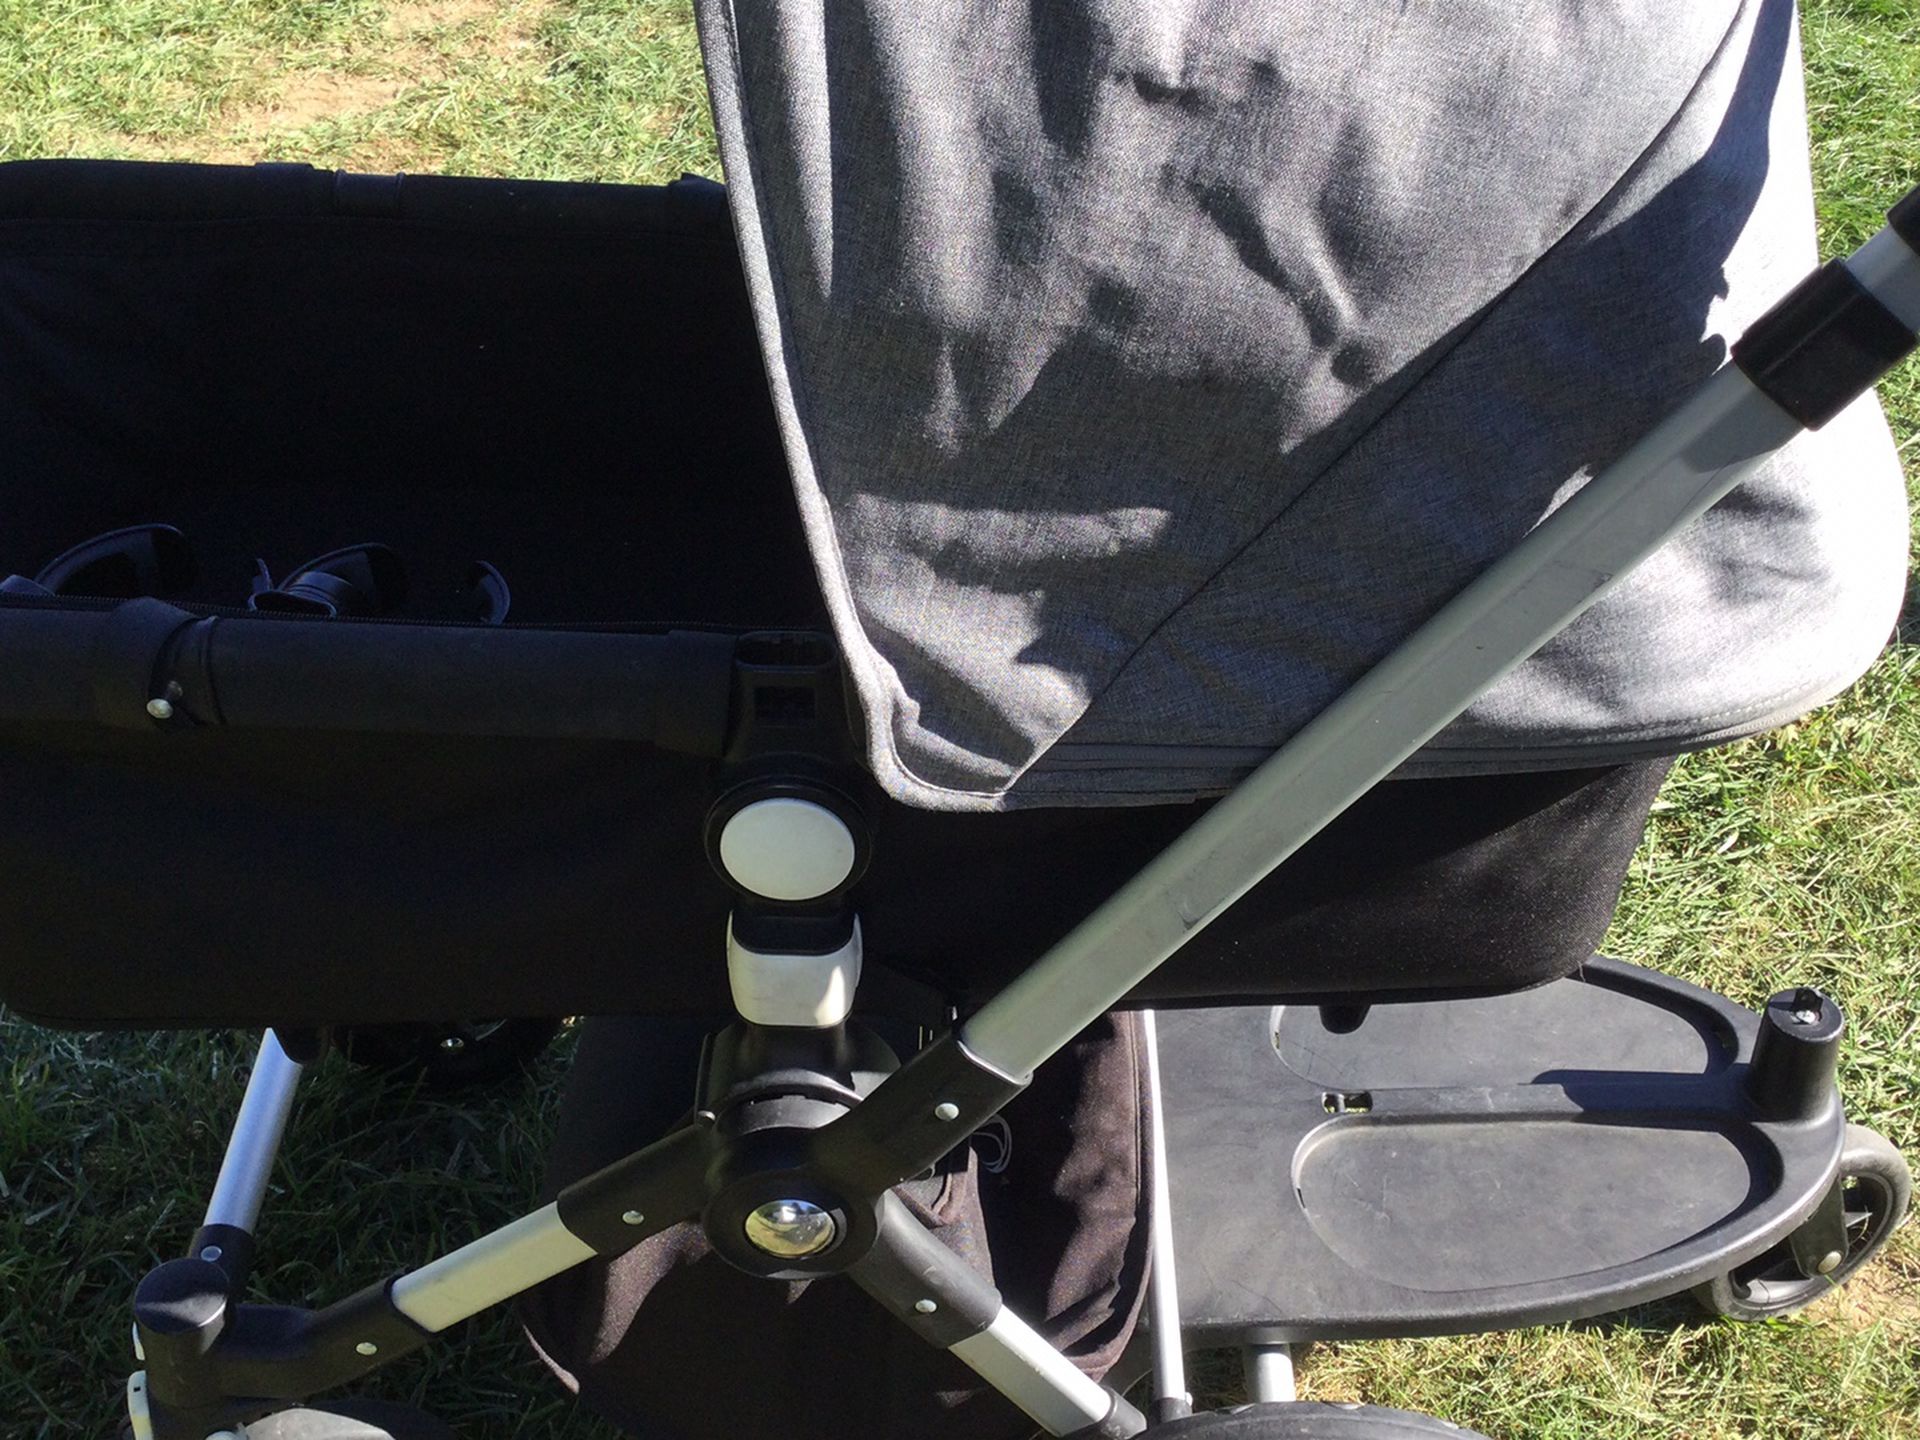 Bugaboo Stroller With Accessories 